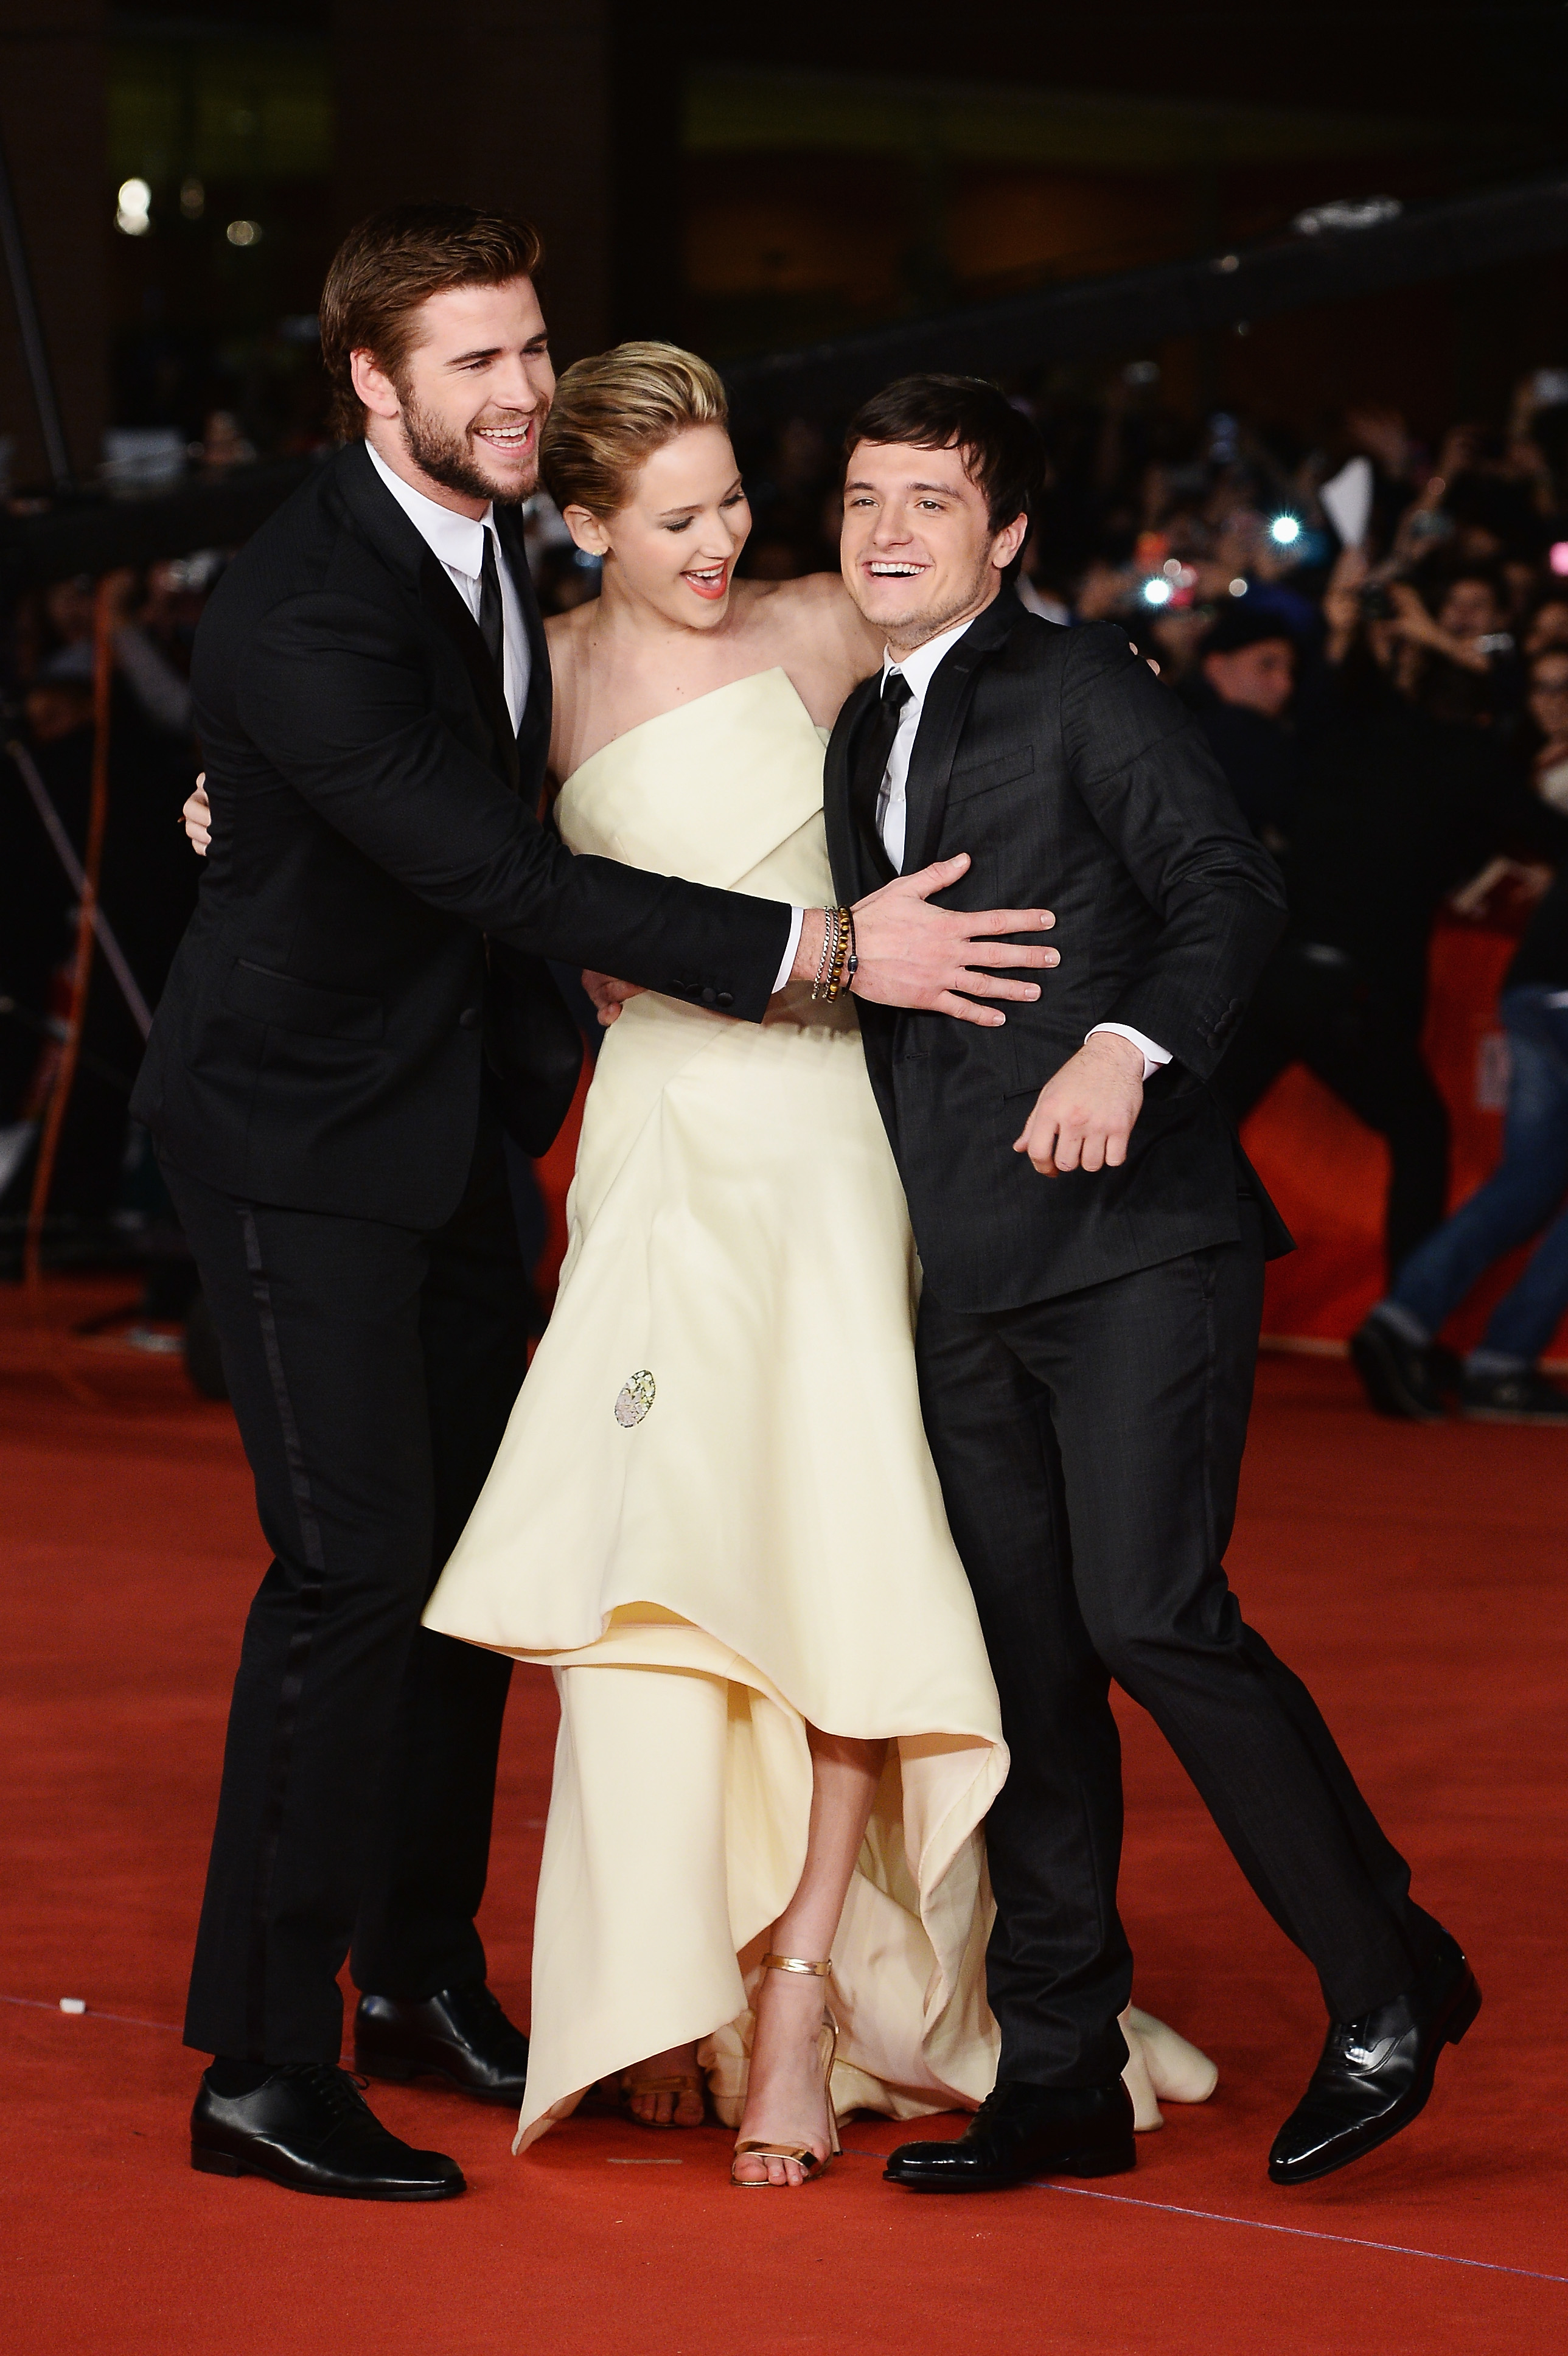 Liam Hemsworth, Jennifer Lawrence, and Josh Hutcherson laughing on the red carpet